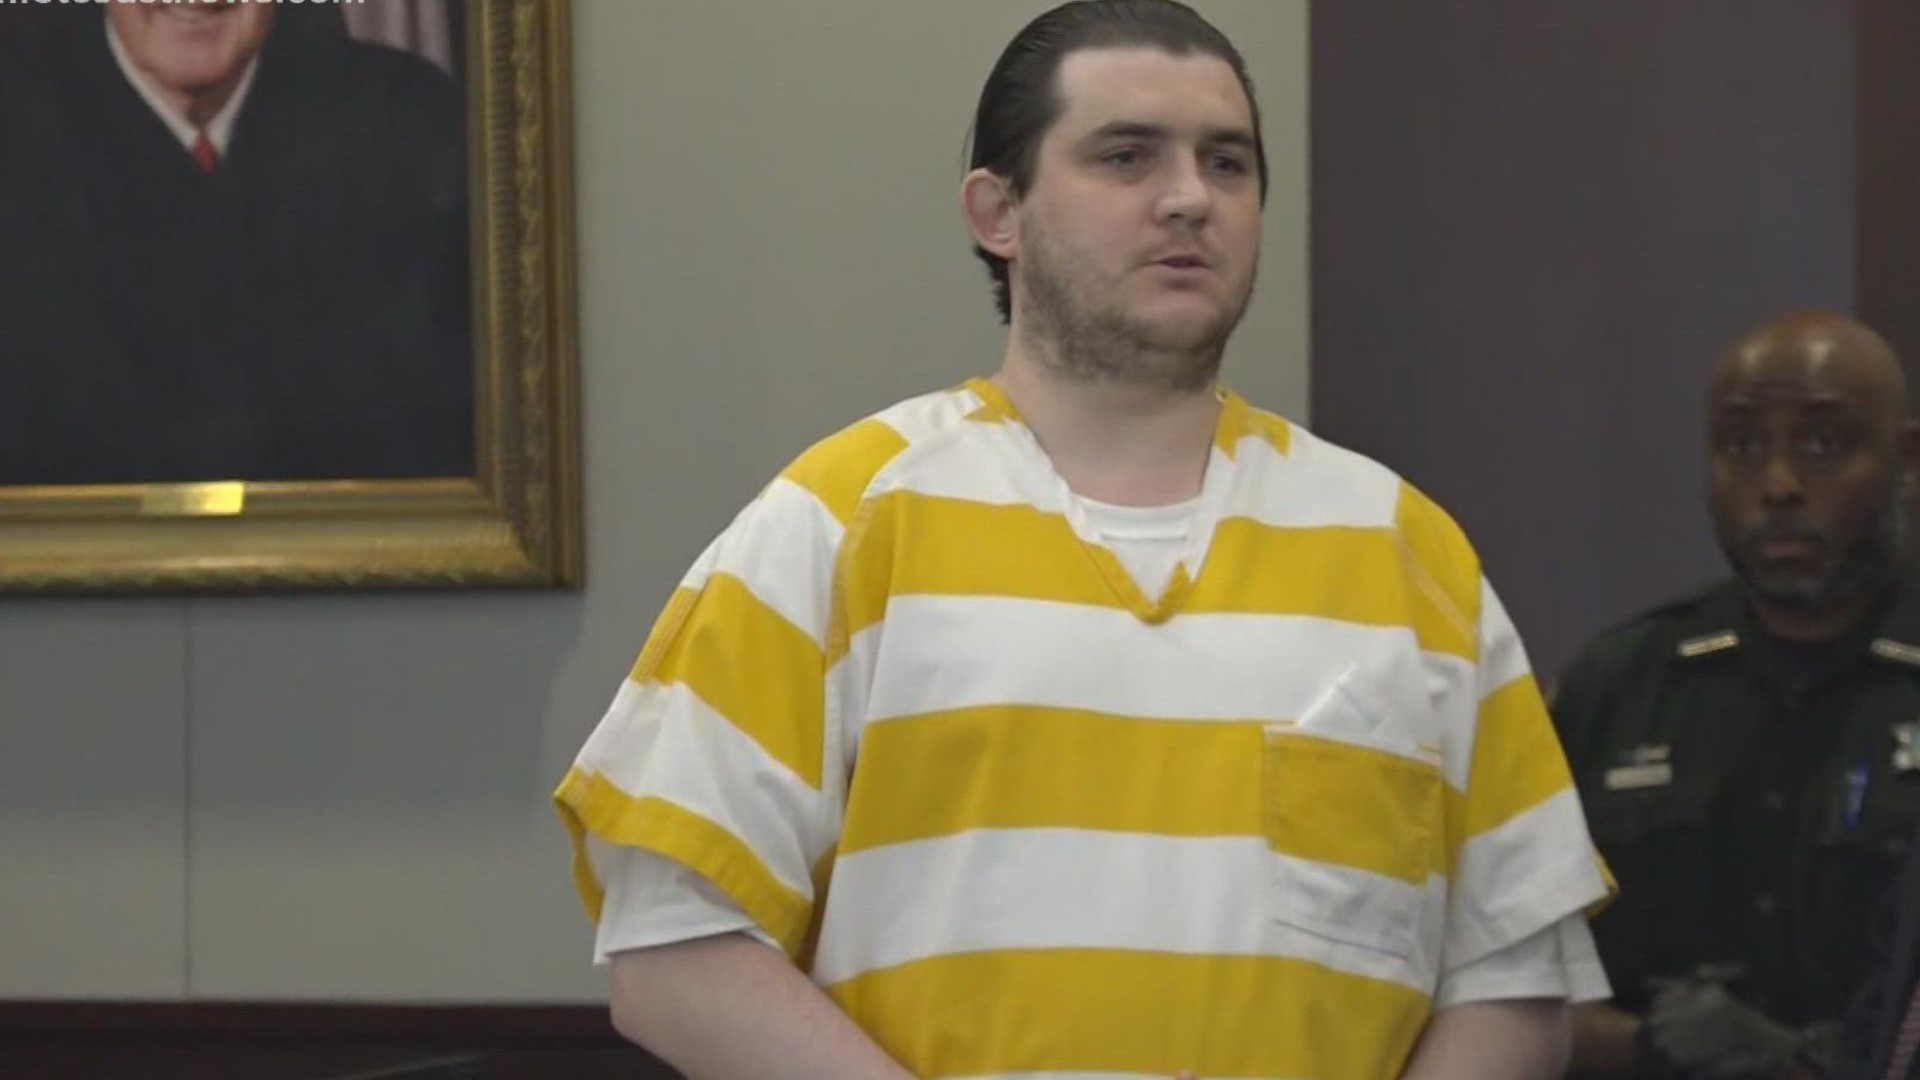 The man charged with killing Jordan Cooper, a Keystone Heights woman with mental deficiencies, was sentenced Friday morning to 55 years in prison.